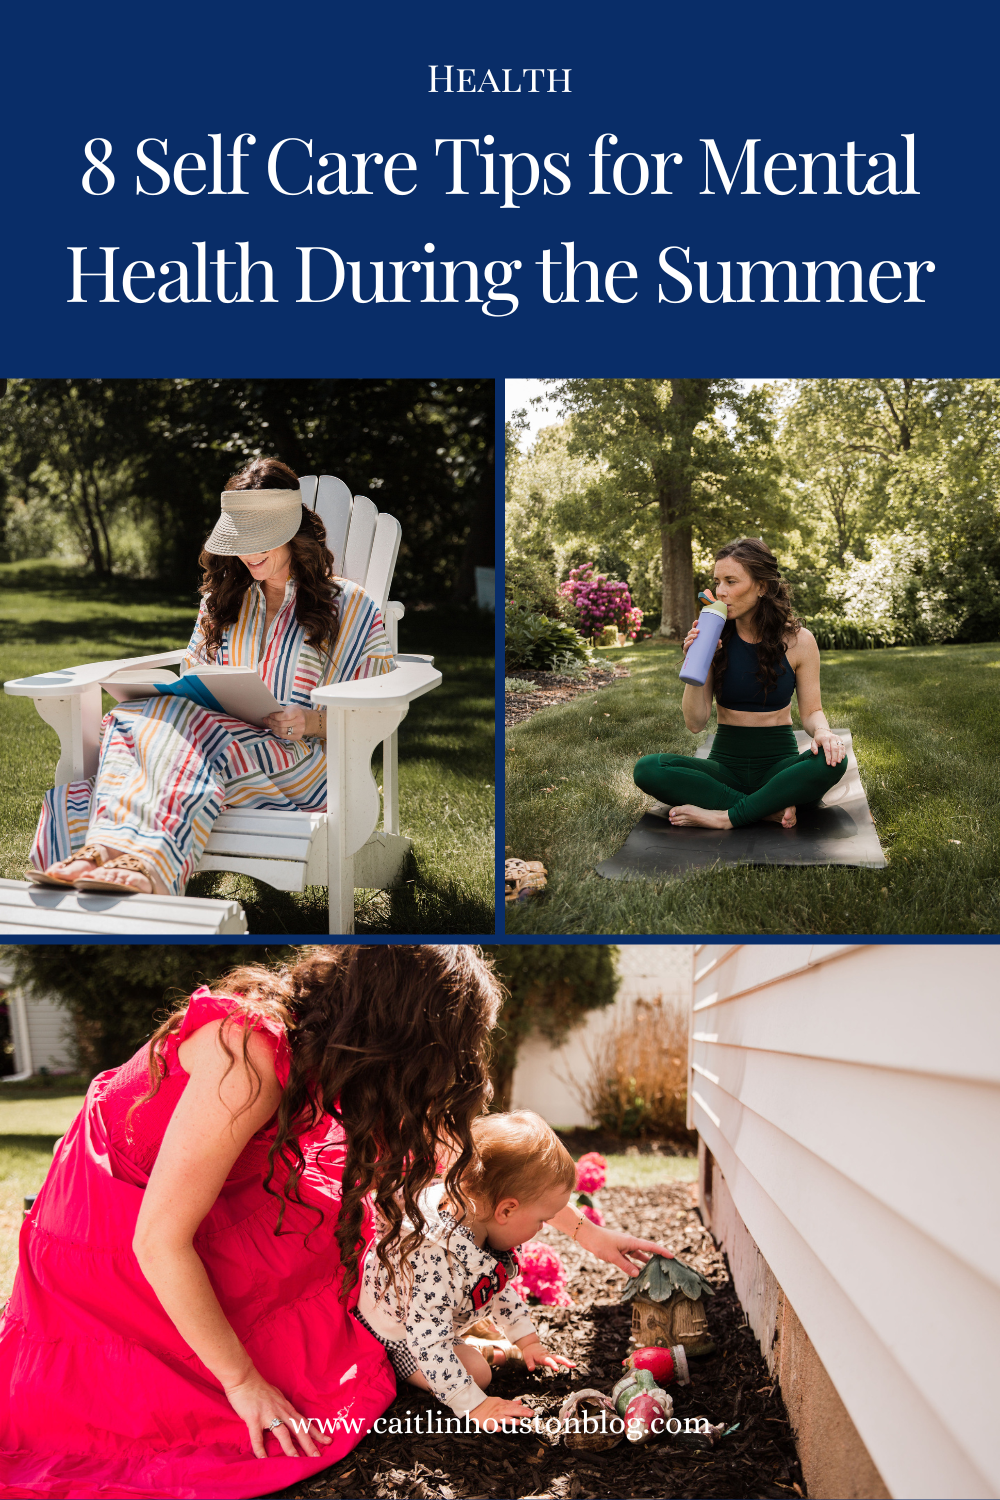 8 Self Care Tips for Mental Health During the Summer